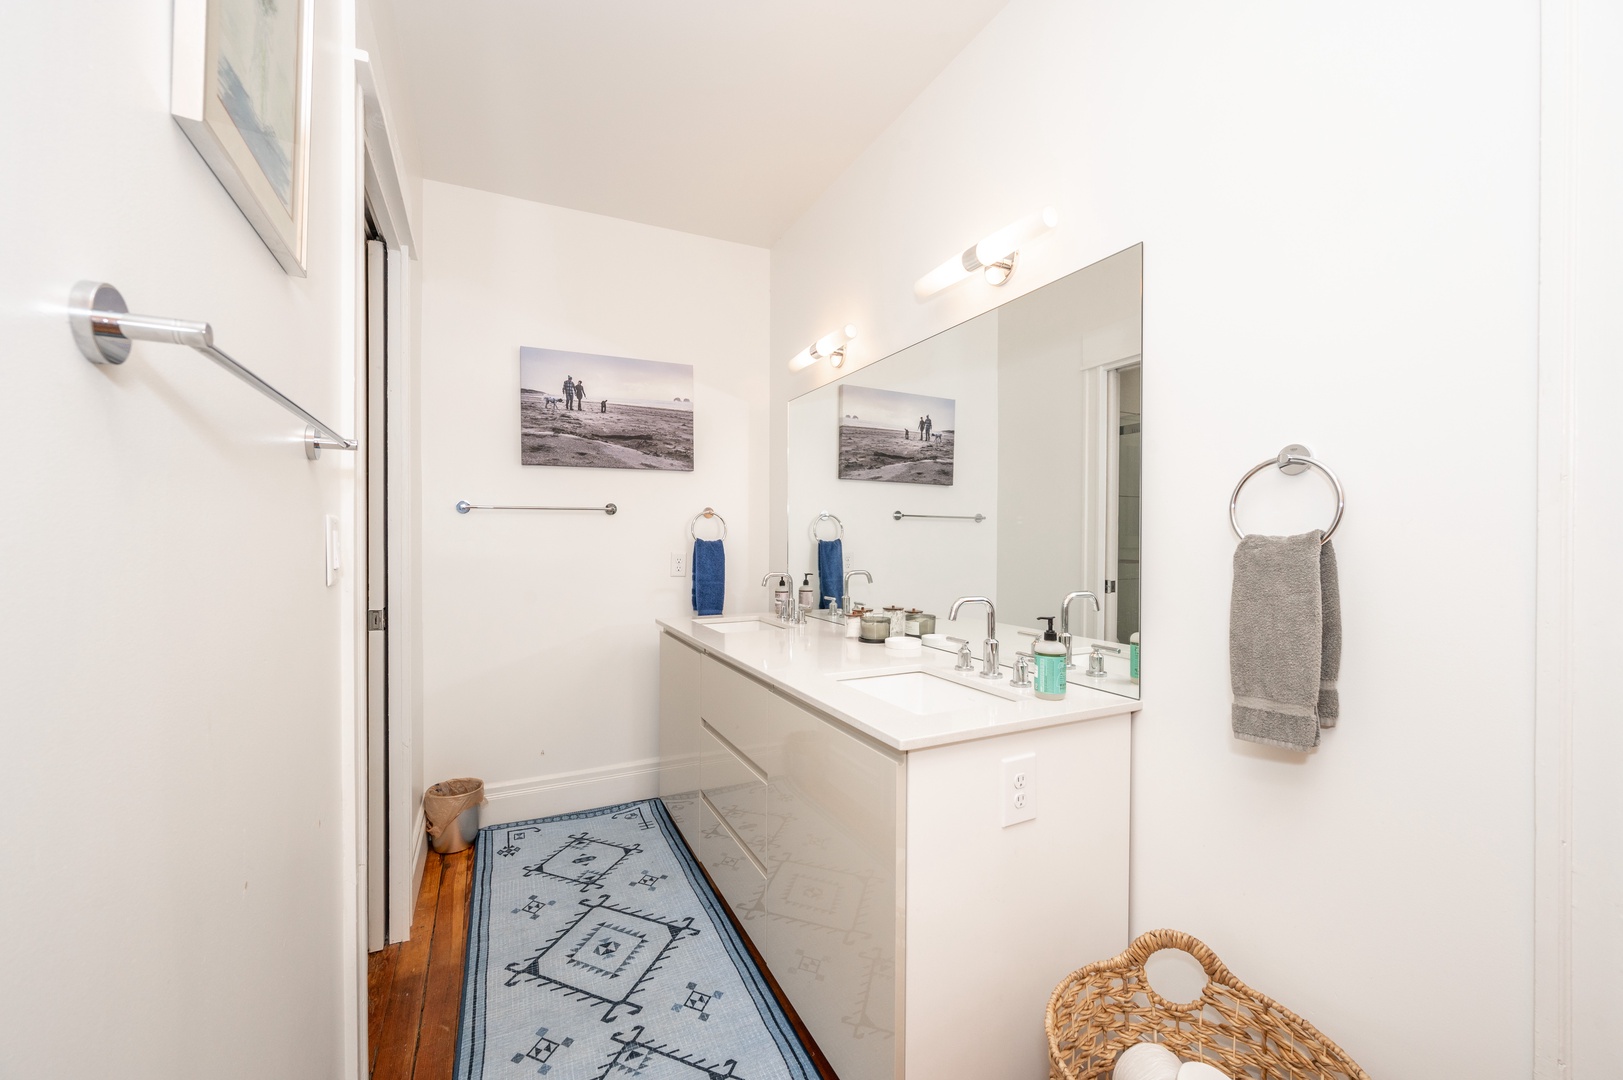 Enjoy a large double vanity & spa-like glass shower in the king ensuite bath